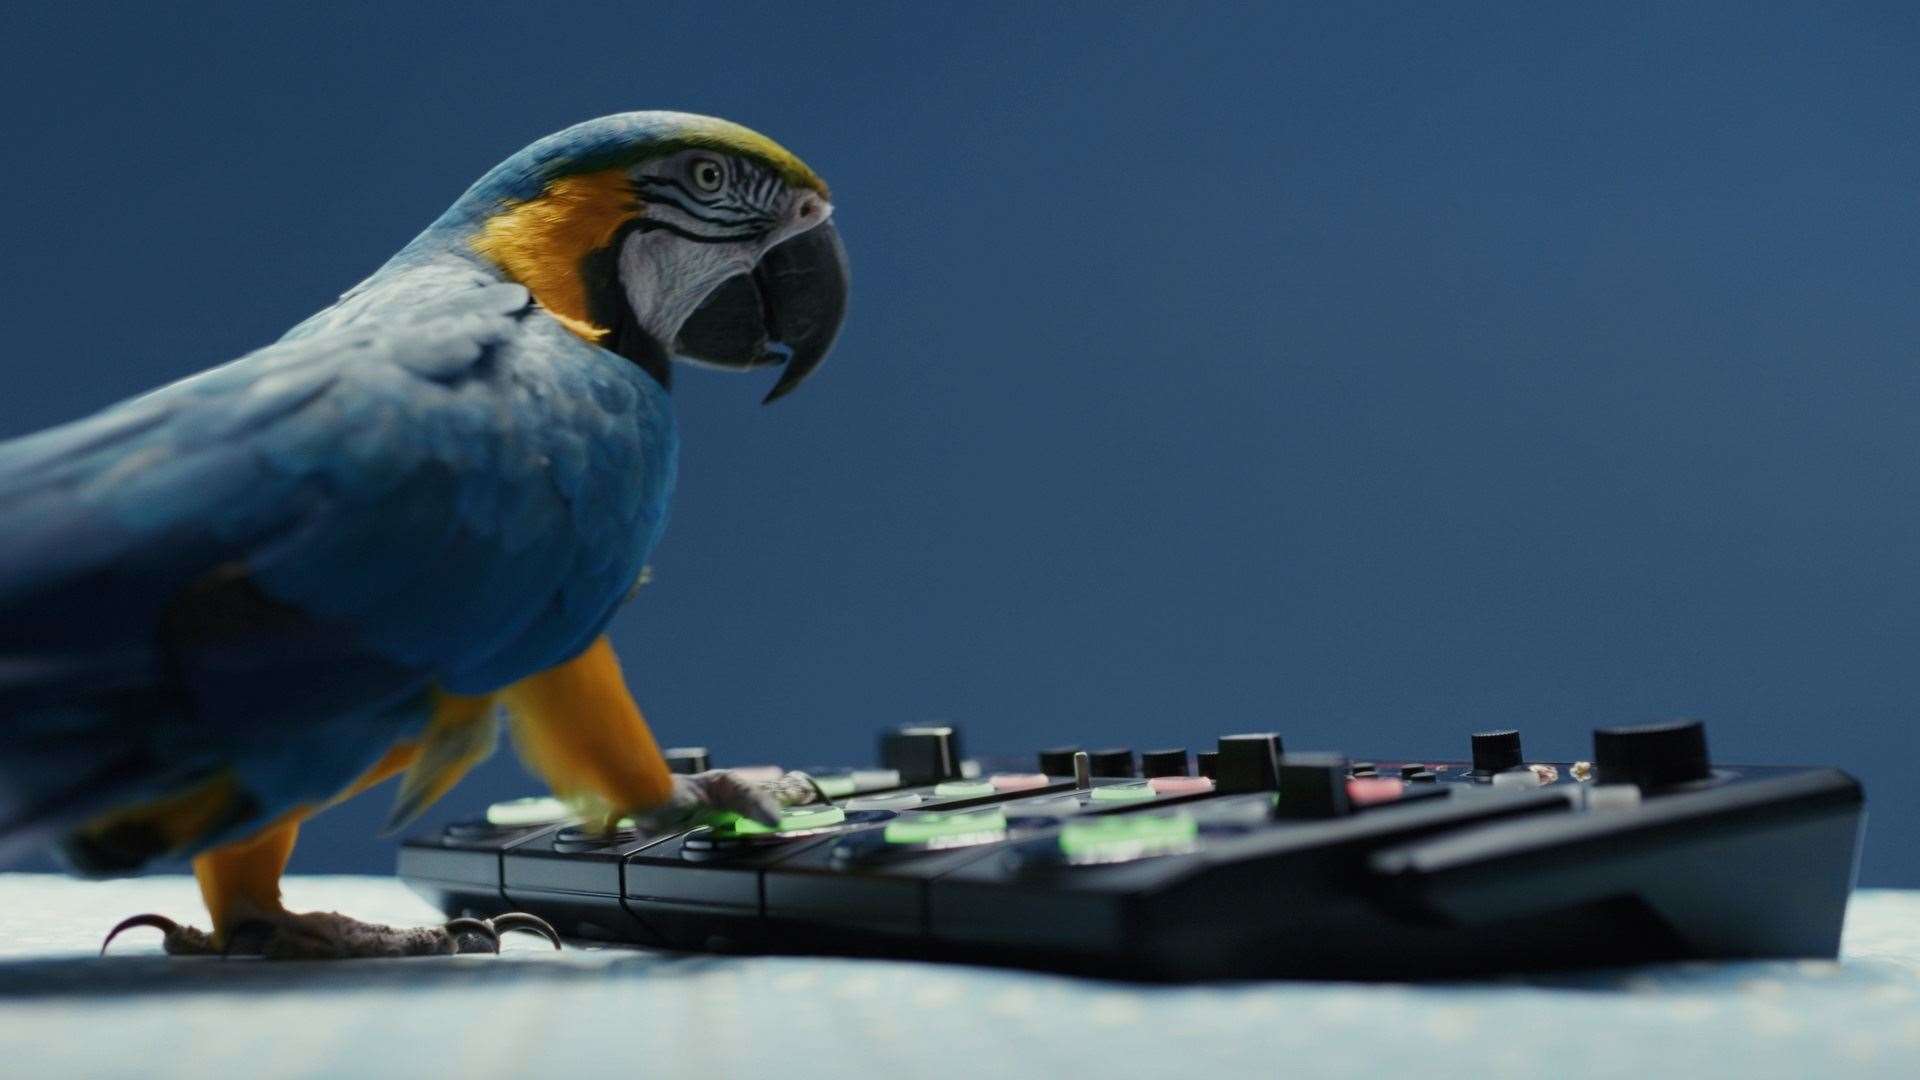 Henry the blue macaw from the new Spot Leukaemia campaign.